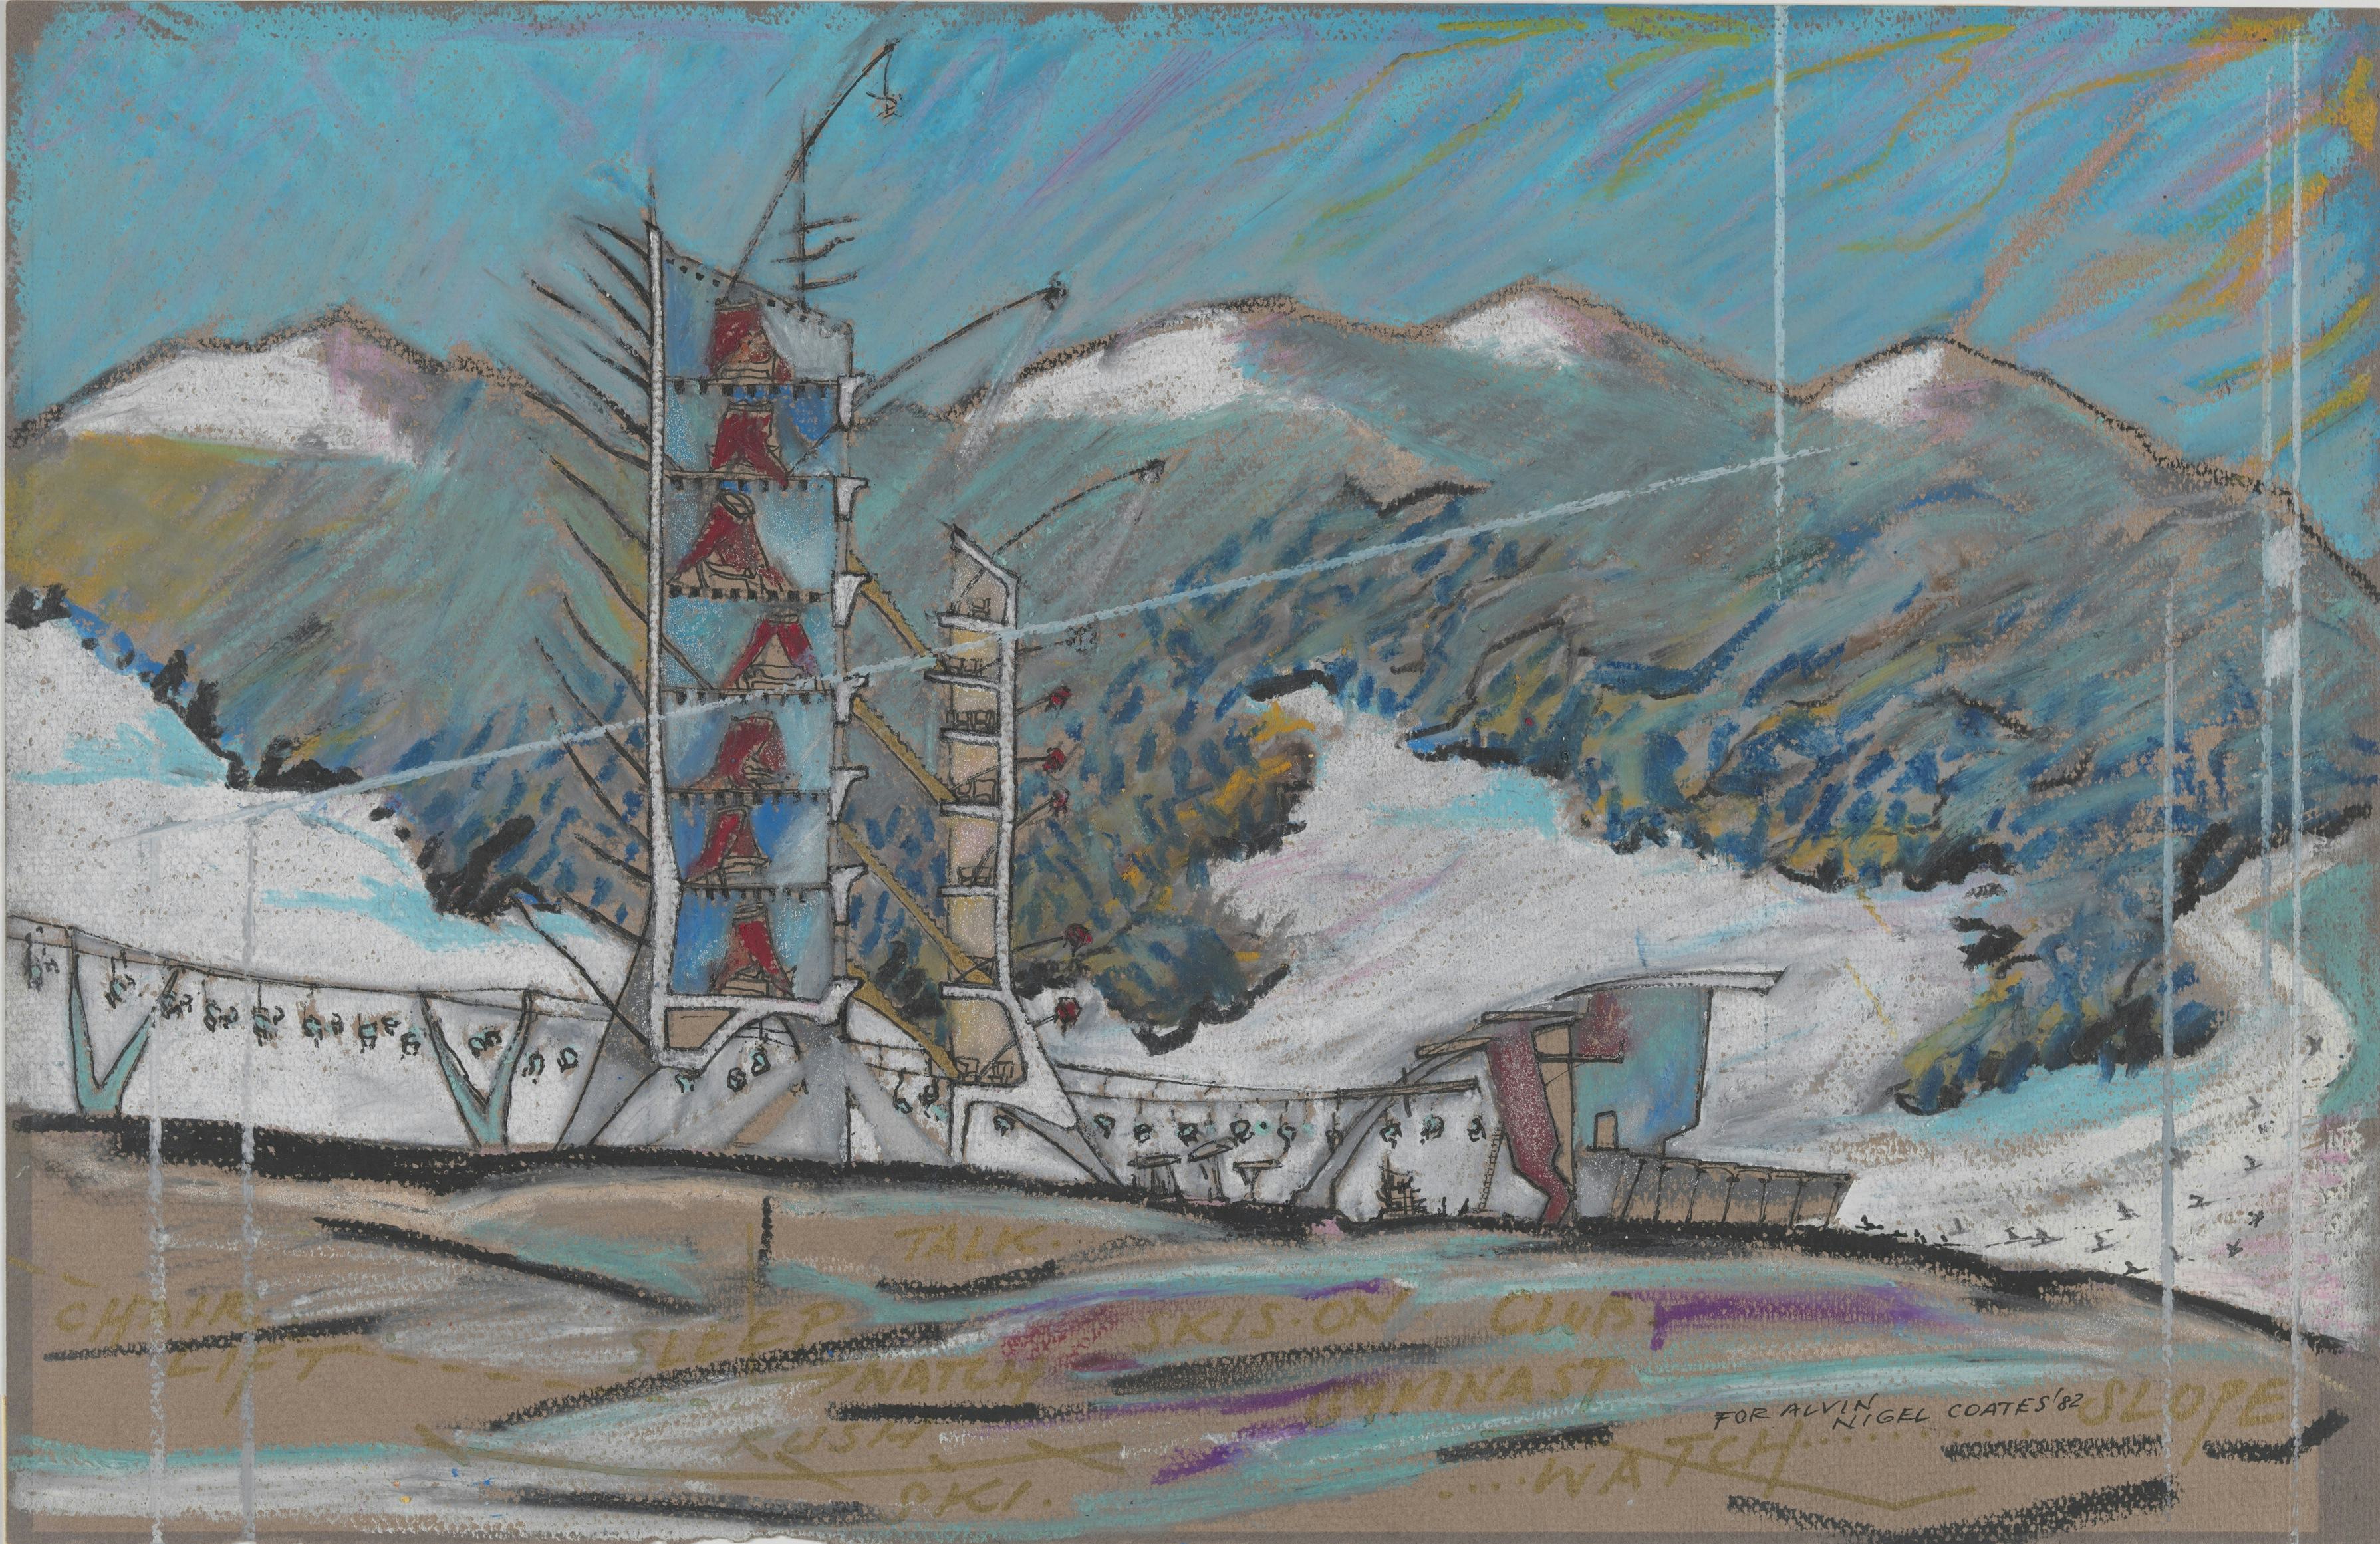 Nigel Coates, 1949 Ski Station, 1982 Oil pastel, pen and black ink, gold marker ink, and spattered white ink on dark gray paper (faded to brown) Imagesheet 32.5 x 50 cm, From the Collection of the Alvin Boyarsky Archive